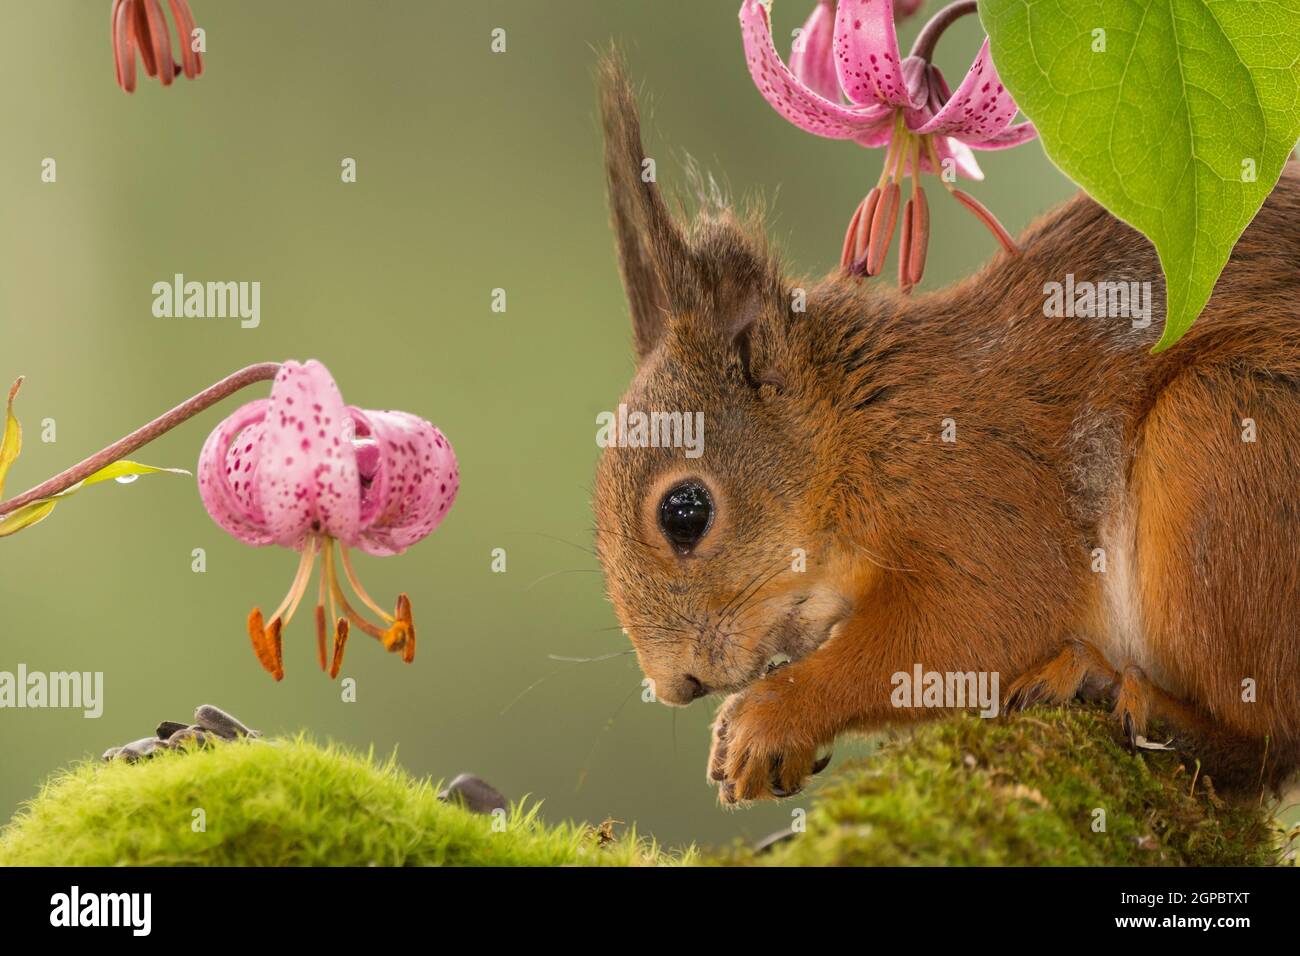 red squirrel standing with lily flowers looking down Stock Photo